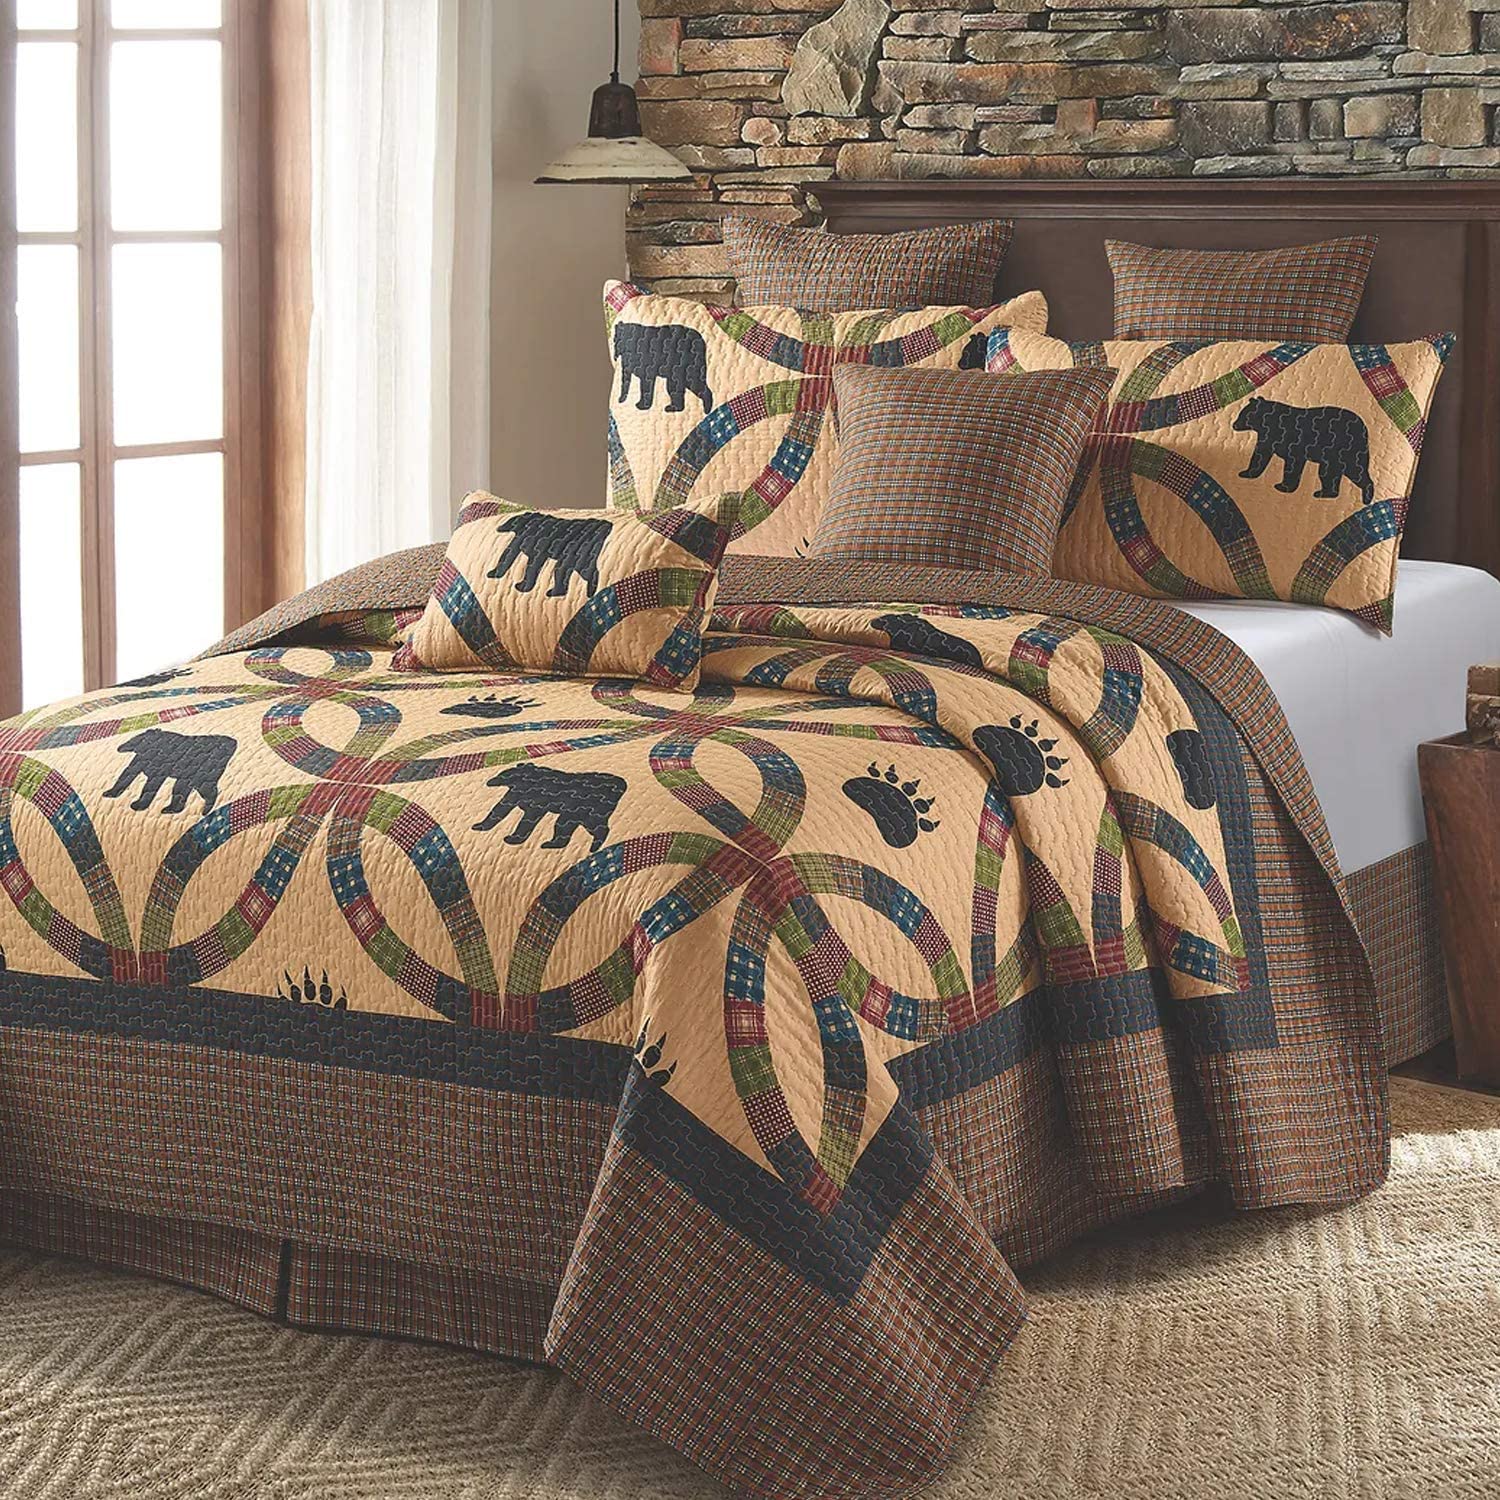 Details about   Virah Bella Collection Phyllis Dobbs Lake Living Polyester King Printed Quilt Be